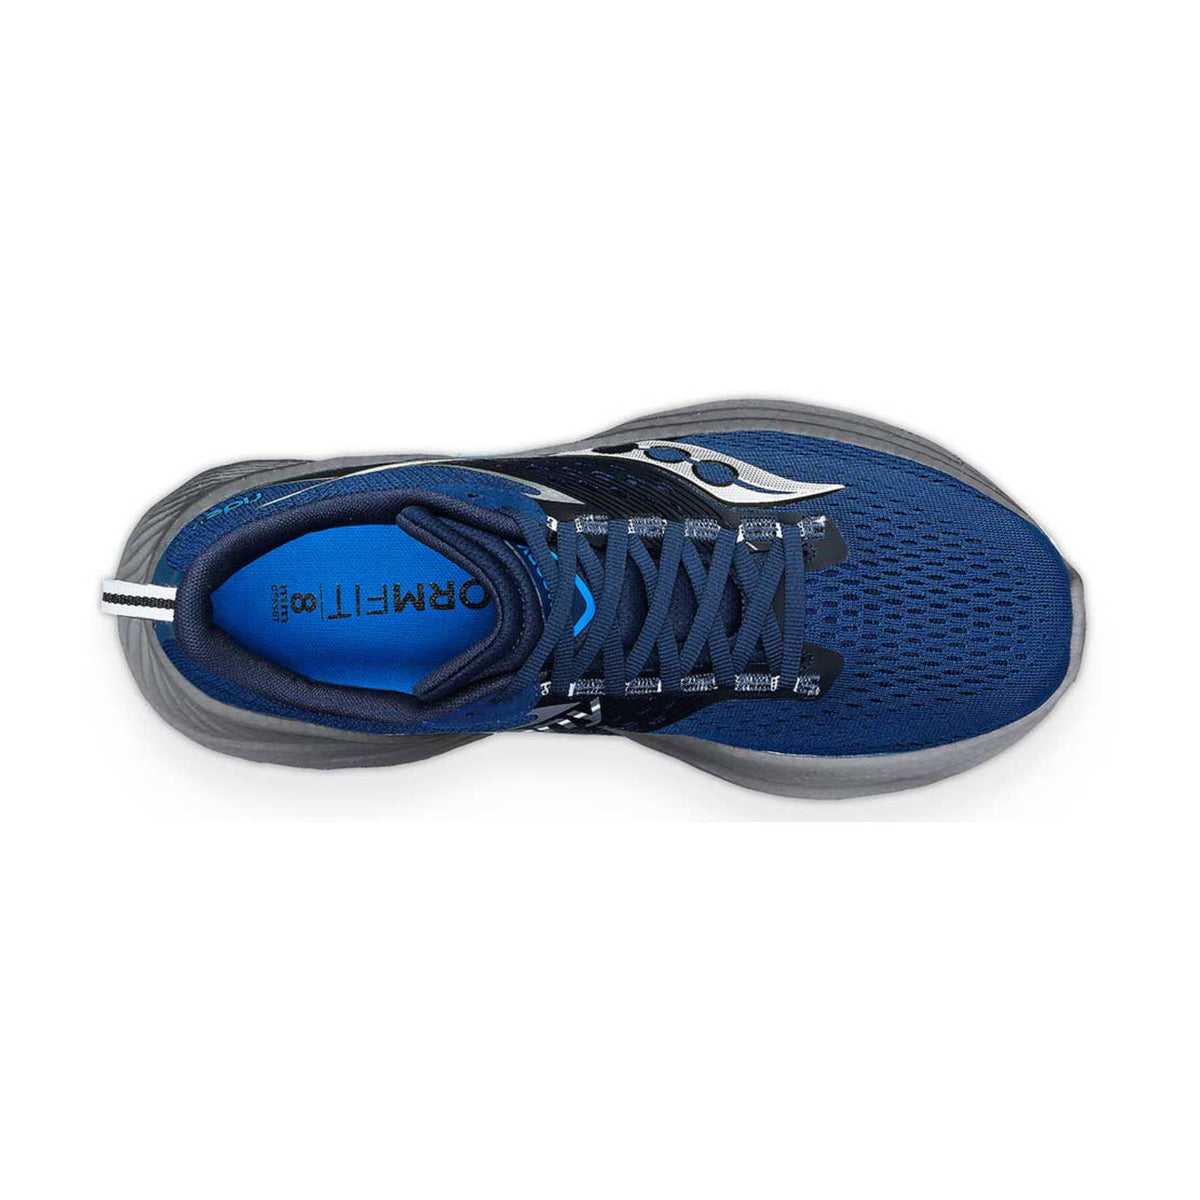 Top view of a blue Saucony Ride 17 Tide/Silver - Mens running shoe with engineered mesh design and logo visible on the insole.